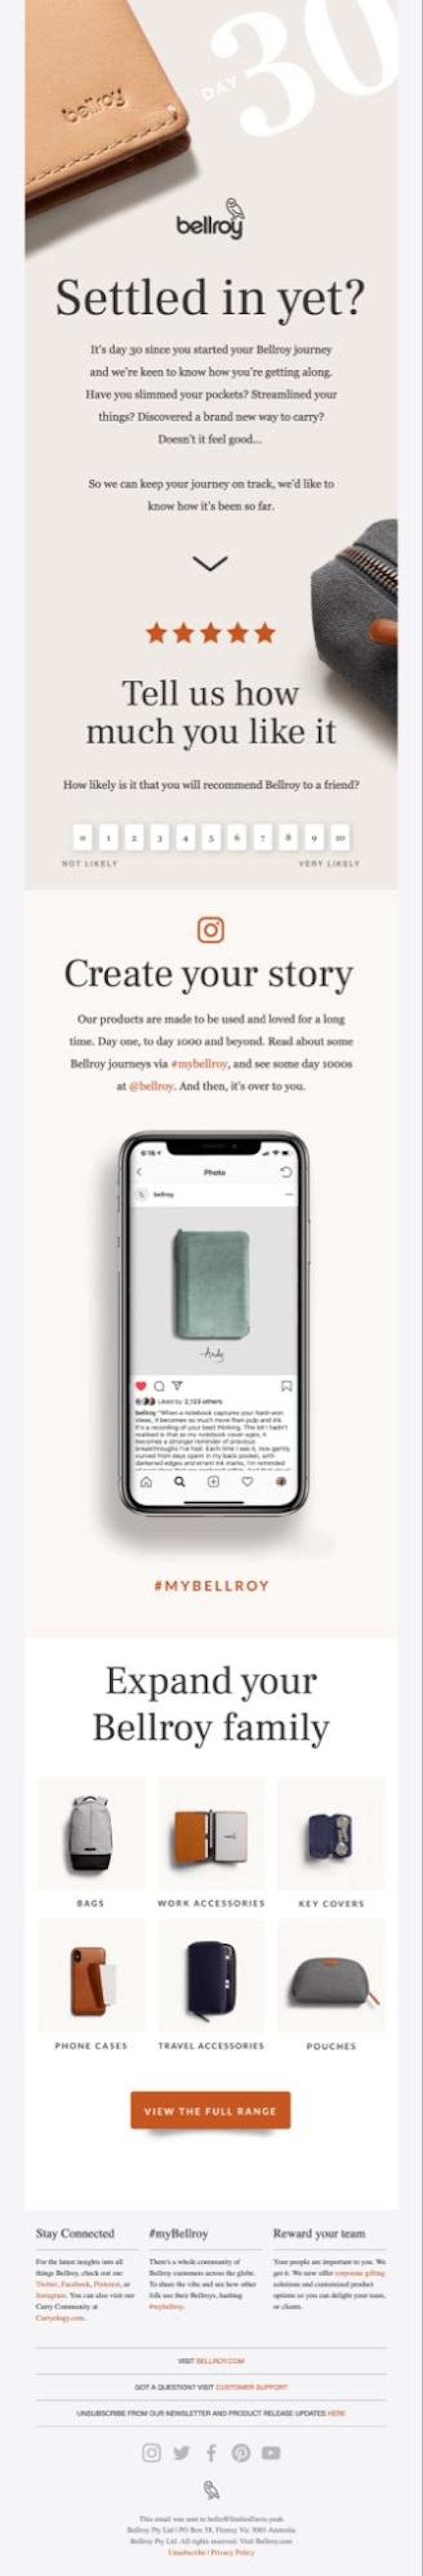 Bellroy's marketing email